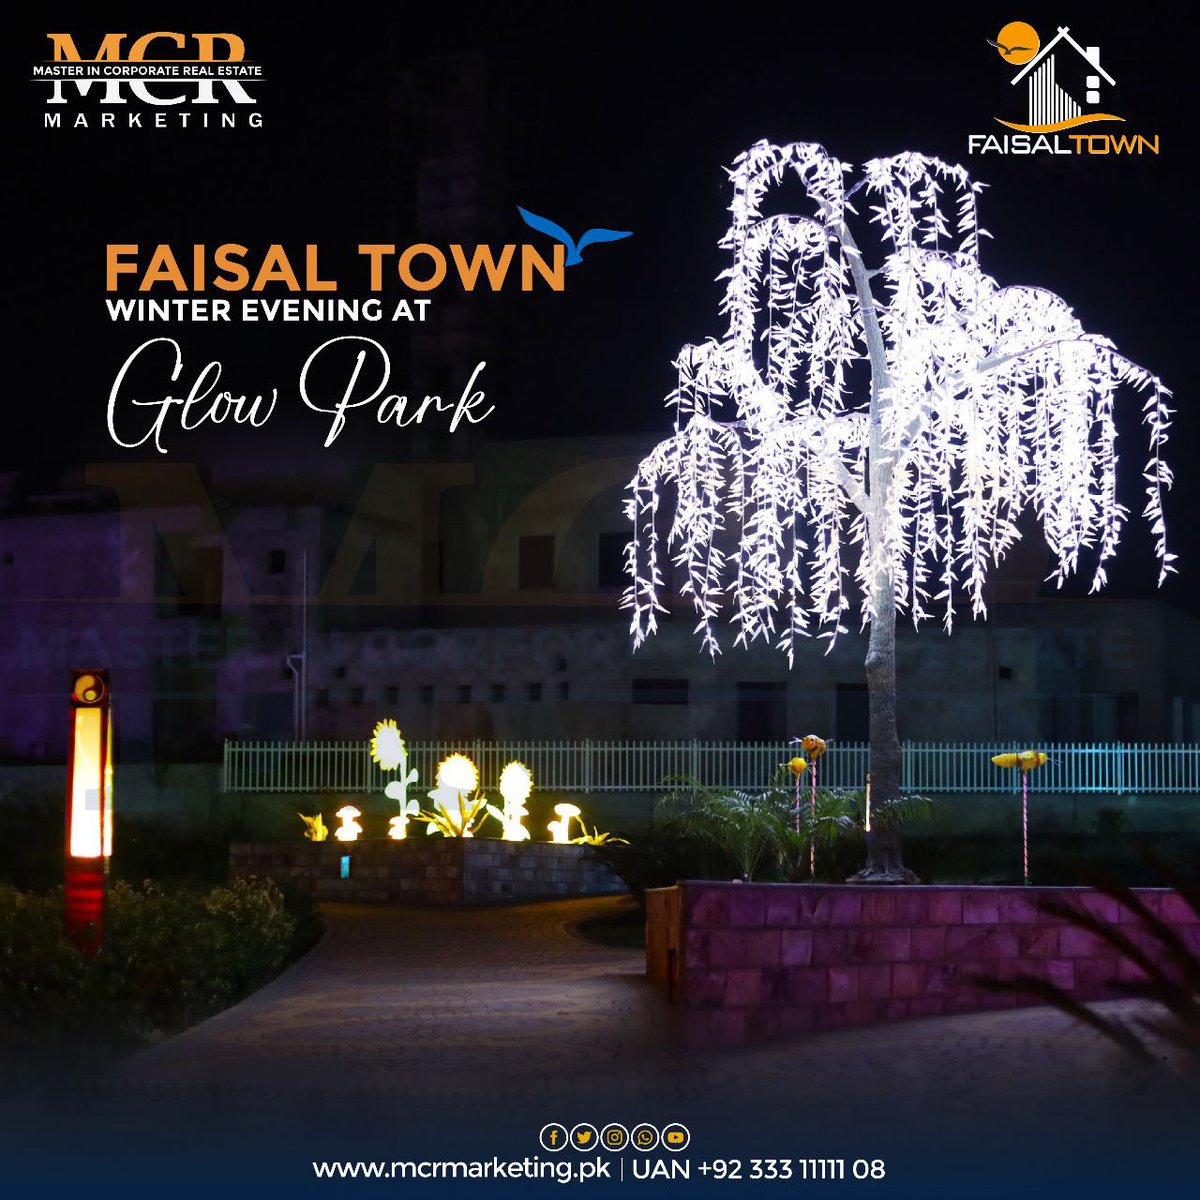 Spend peacefull winter evenings with your family and friends at the Faisal Town Glow Park. Our top goal is creating a space where safe community living is possible. 
𝗖𝗮𝗹𝗹 𝗡𝗼𝘄:
+92 333 1111108
#faisaltownphase2 #realestateinvesting #faisaltown #mcr #mcrmarketing #islamabad